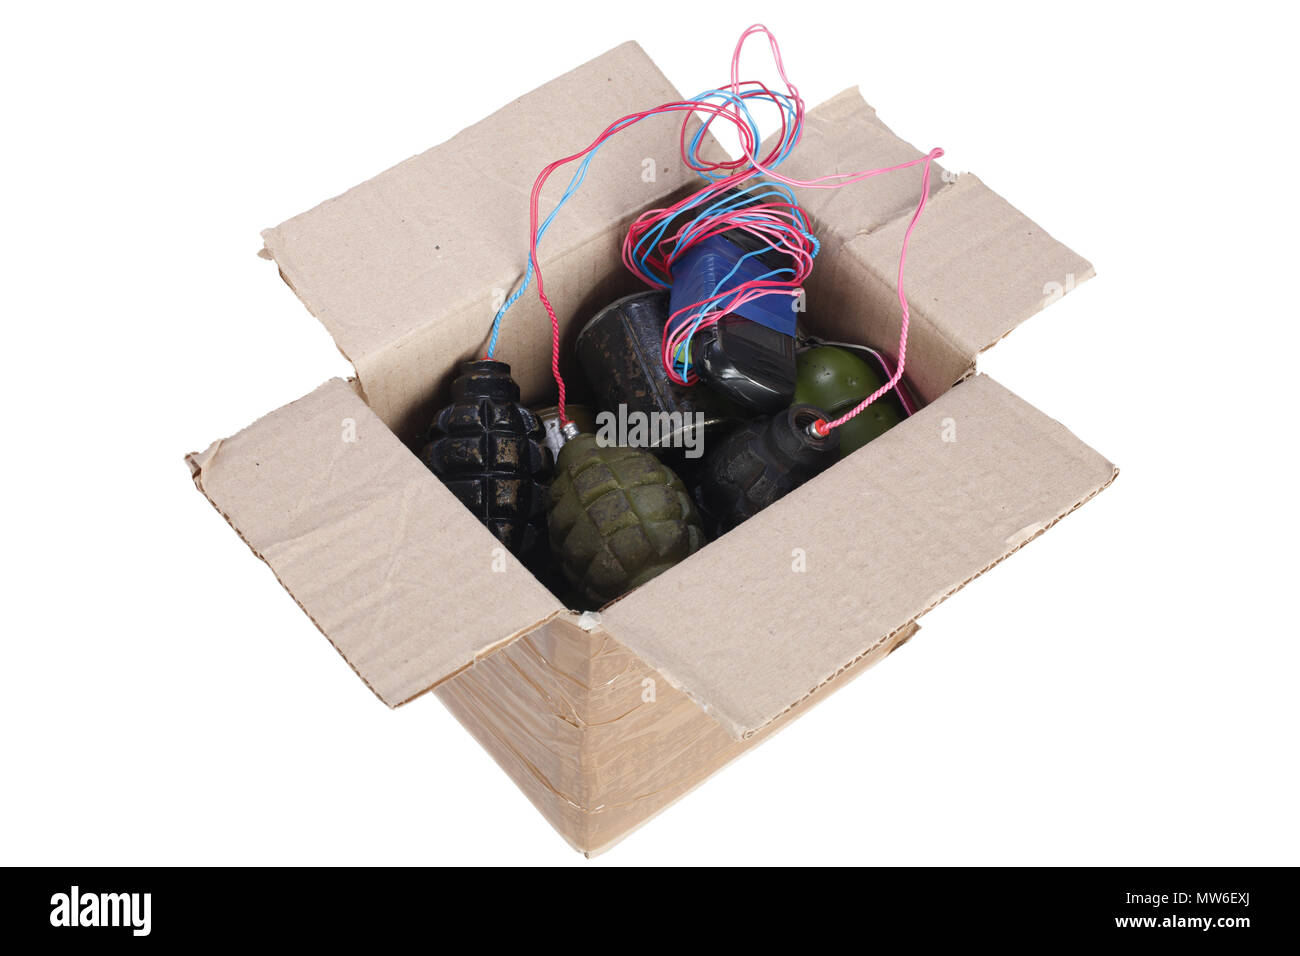 Mailbomb IED - Improvised Explosive Device in mailbox isolated on white Stock Photo